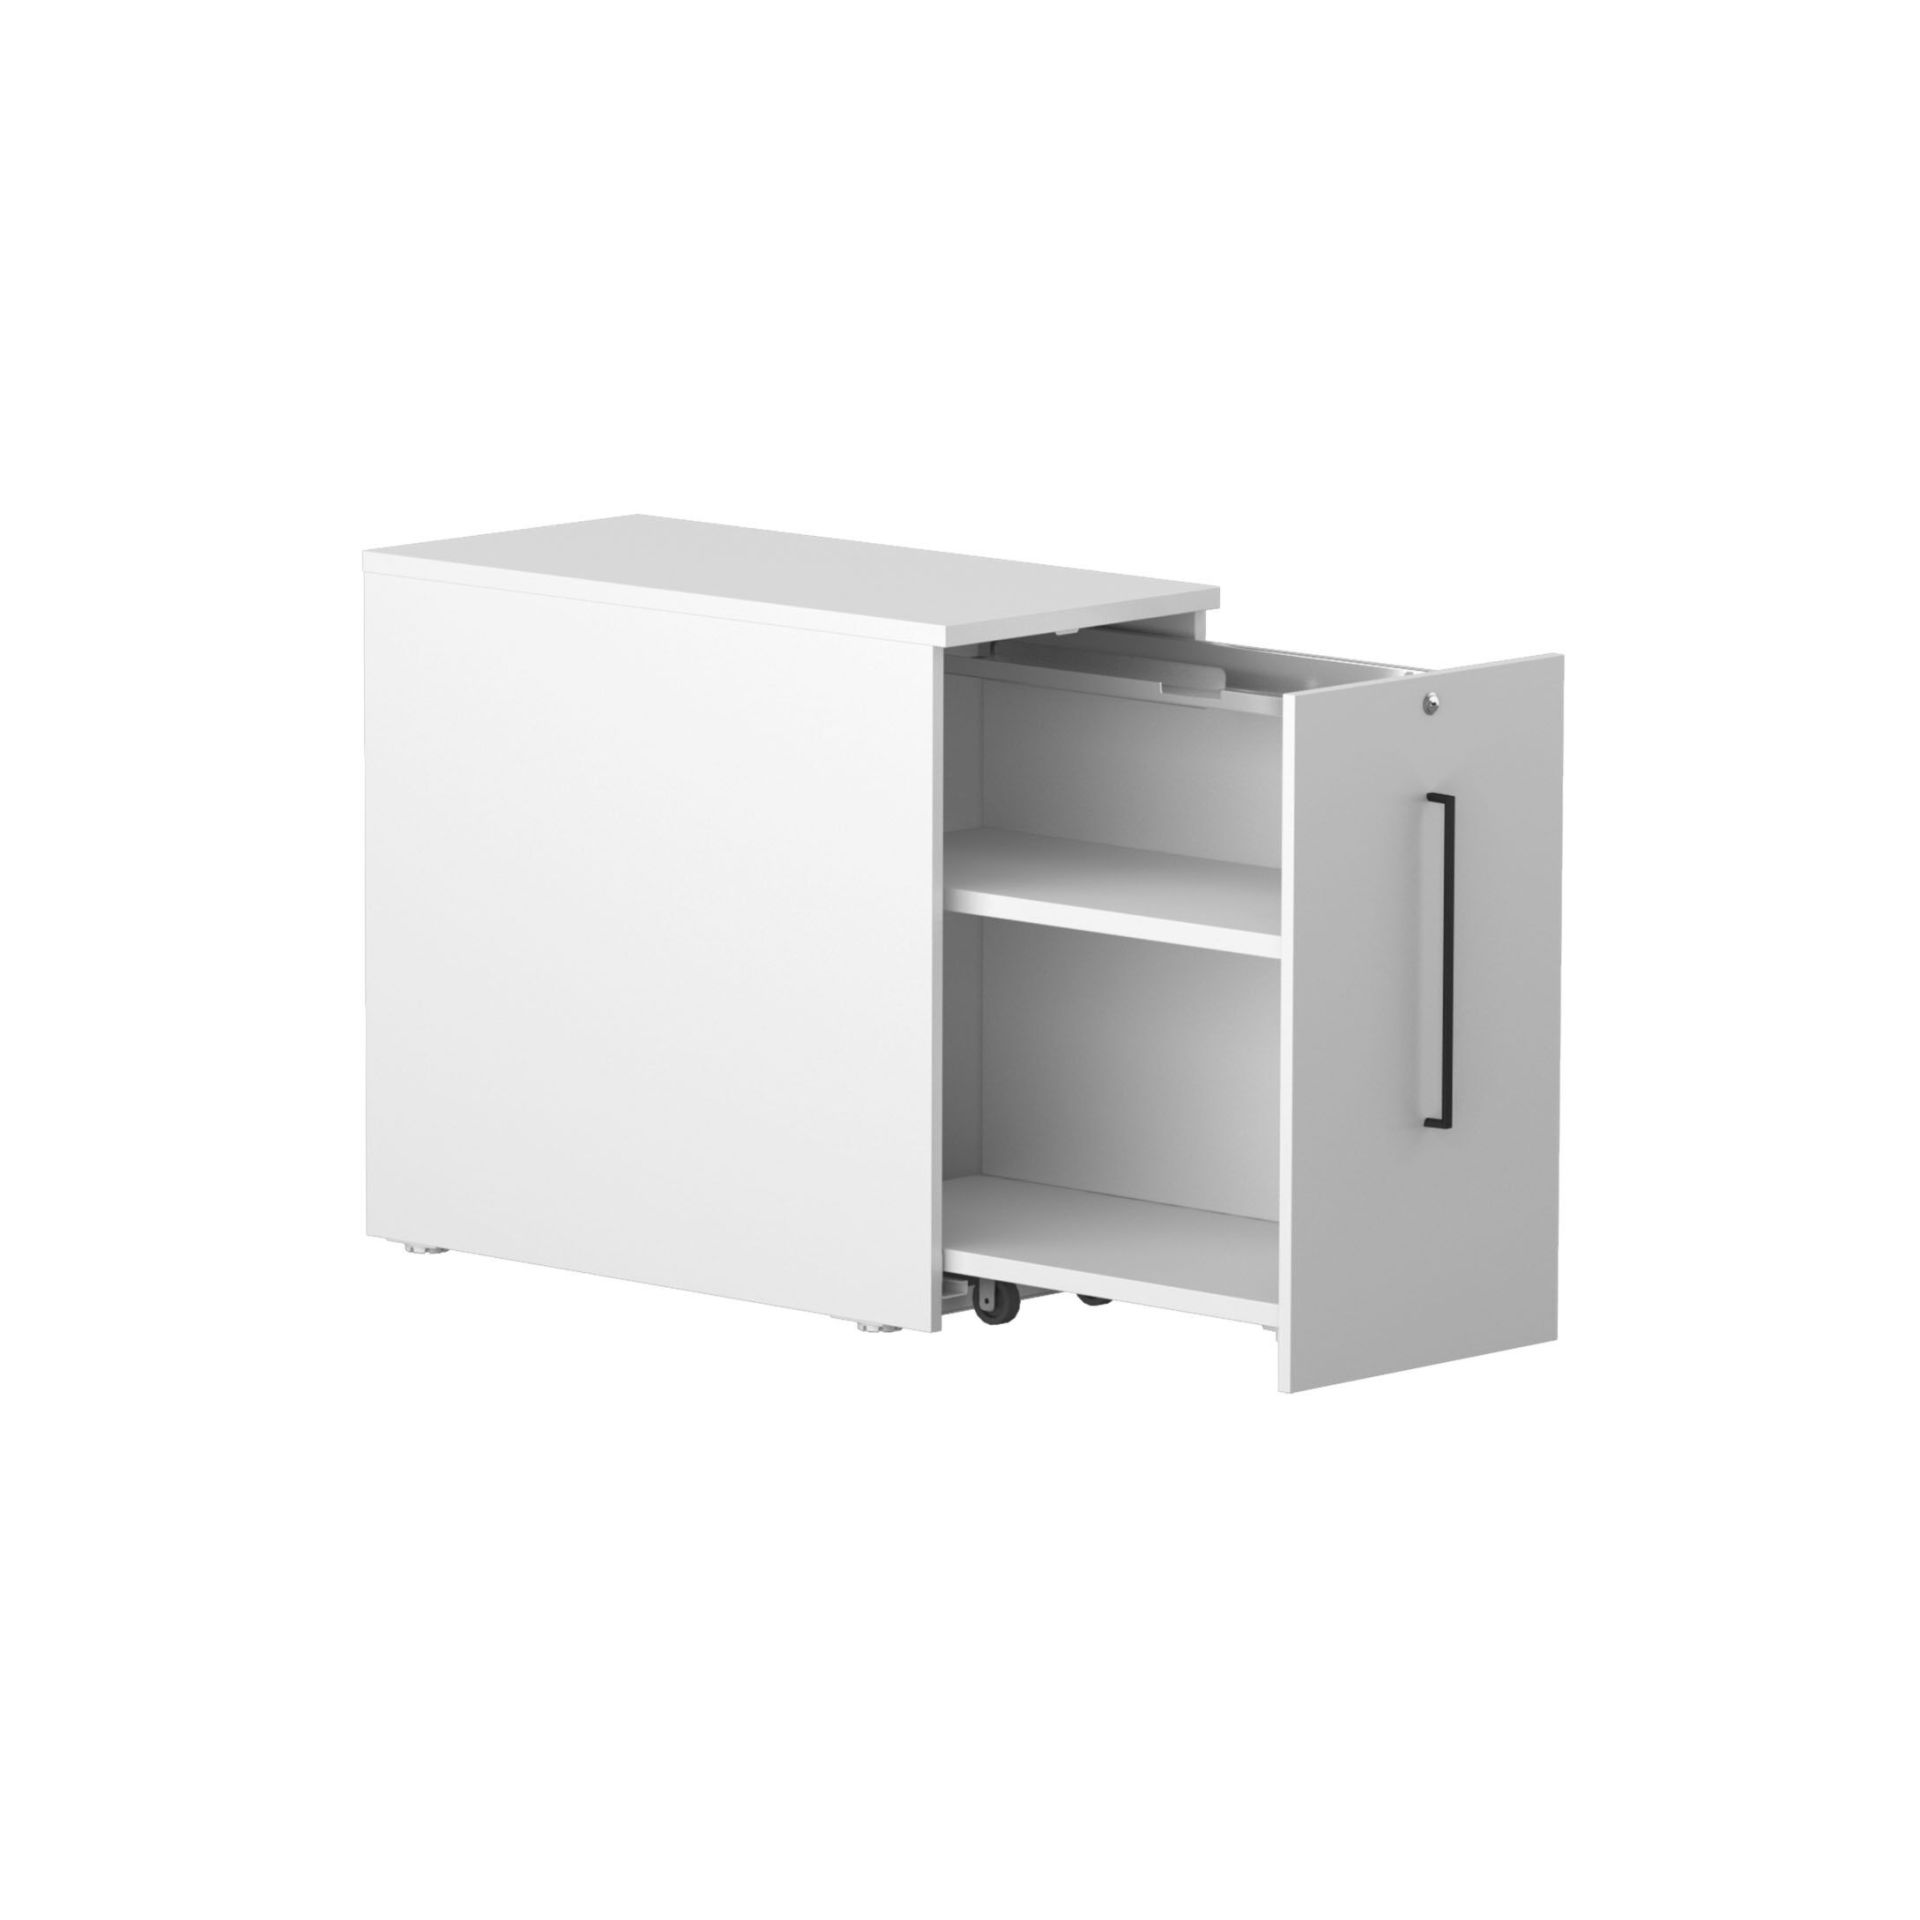 Hold Tower cabinet product image 6